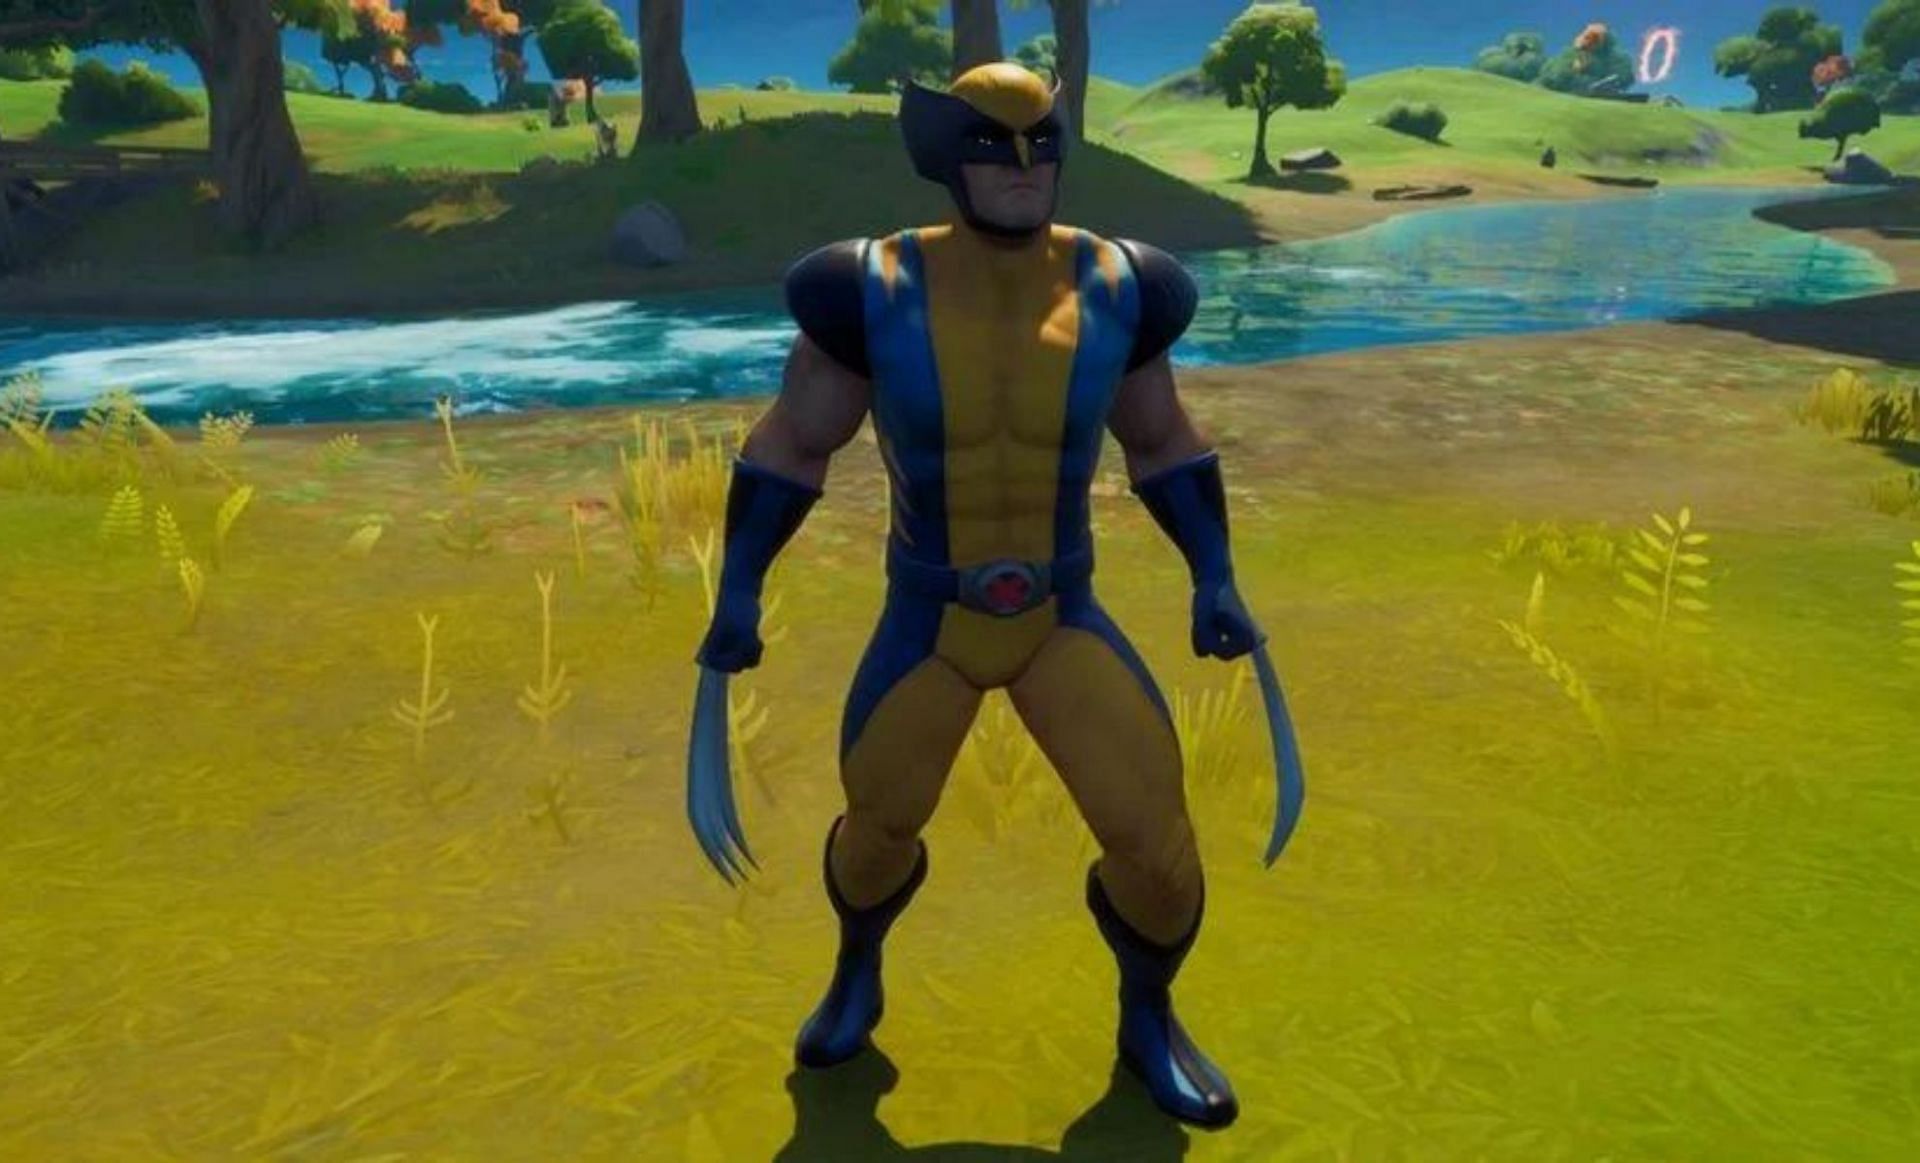 The Wolverine NPC is coming back (Image via Epic Games)